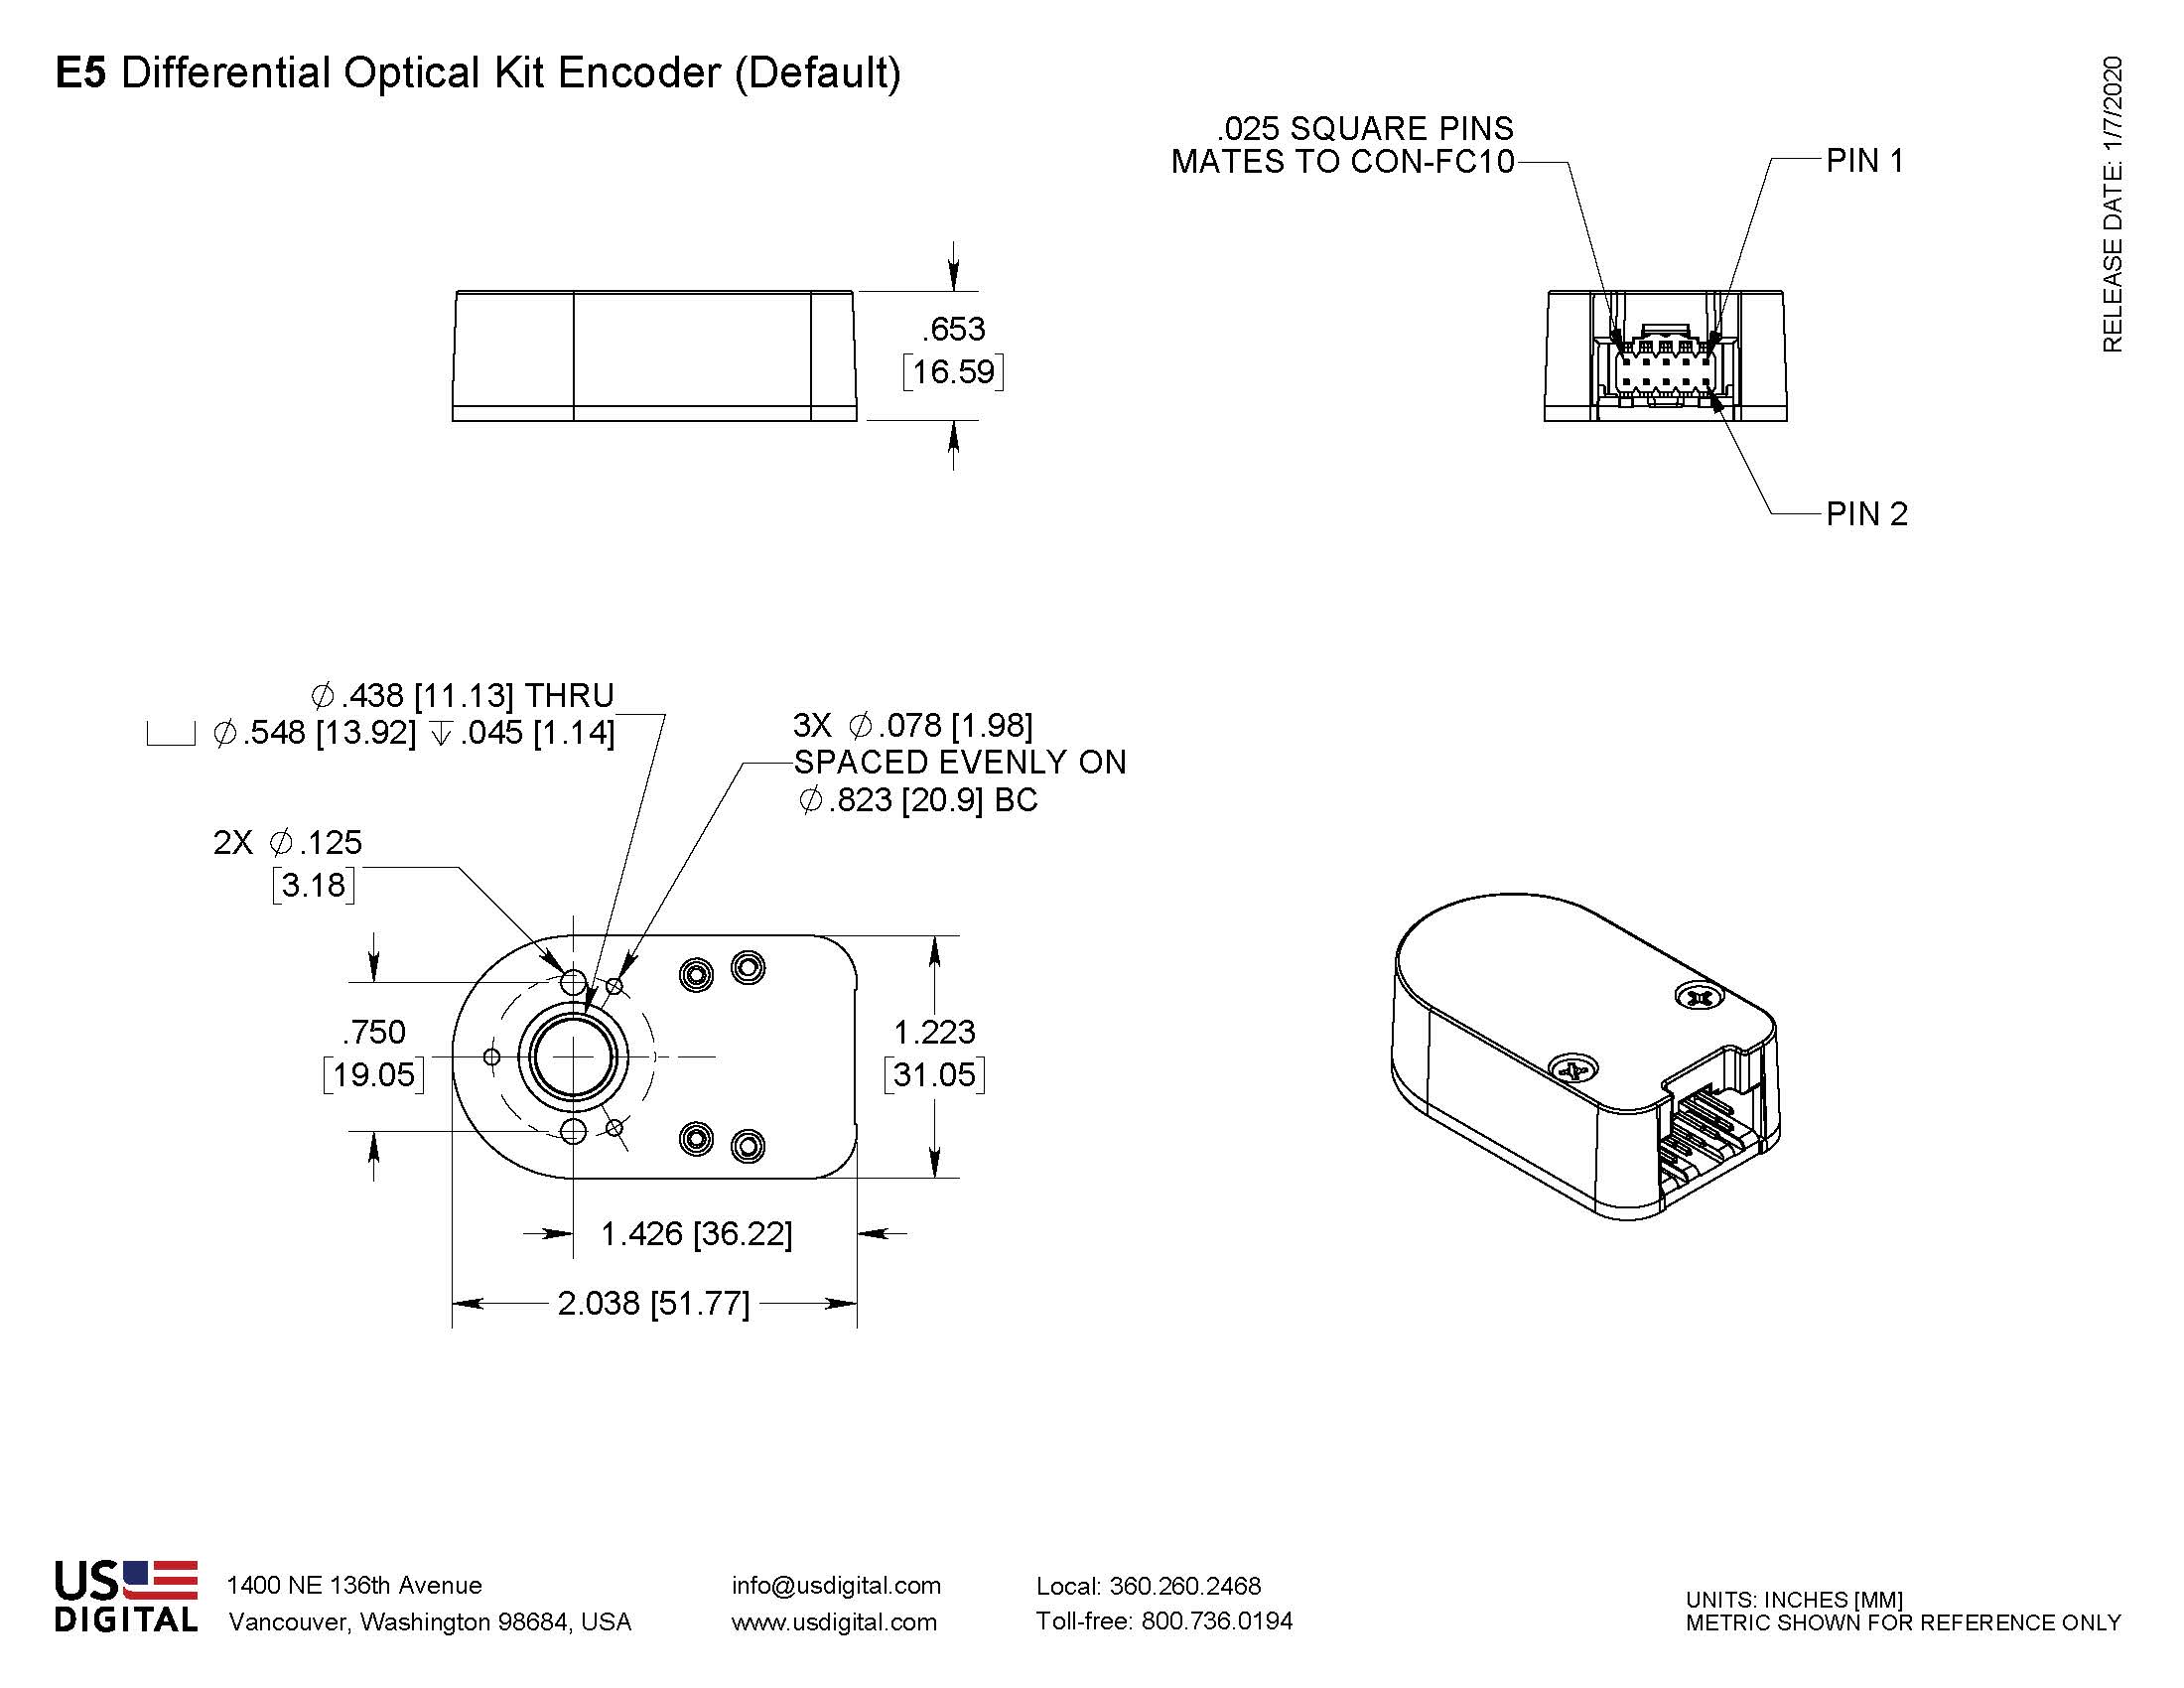 E5 Mechdrw Differential 1 Mechanical Drawing